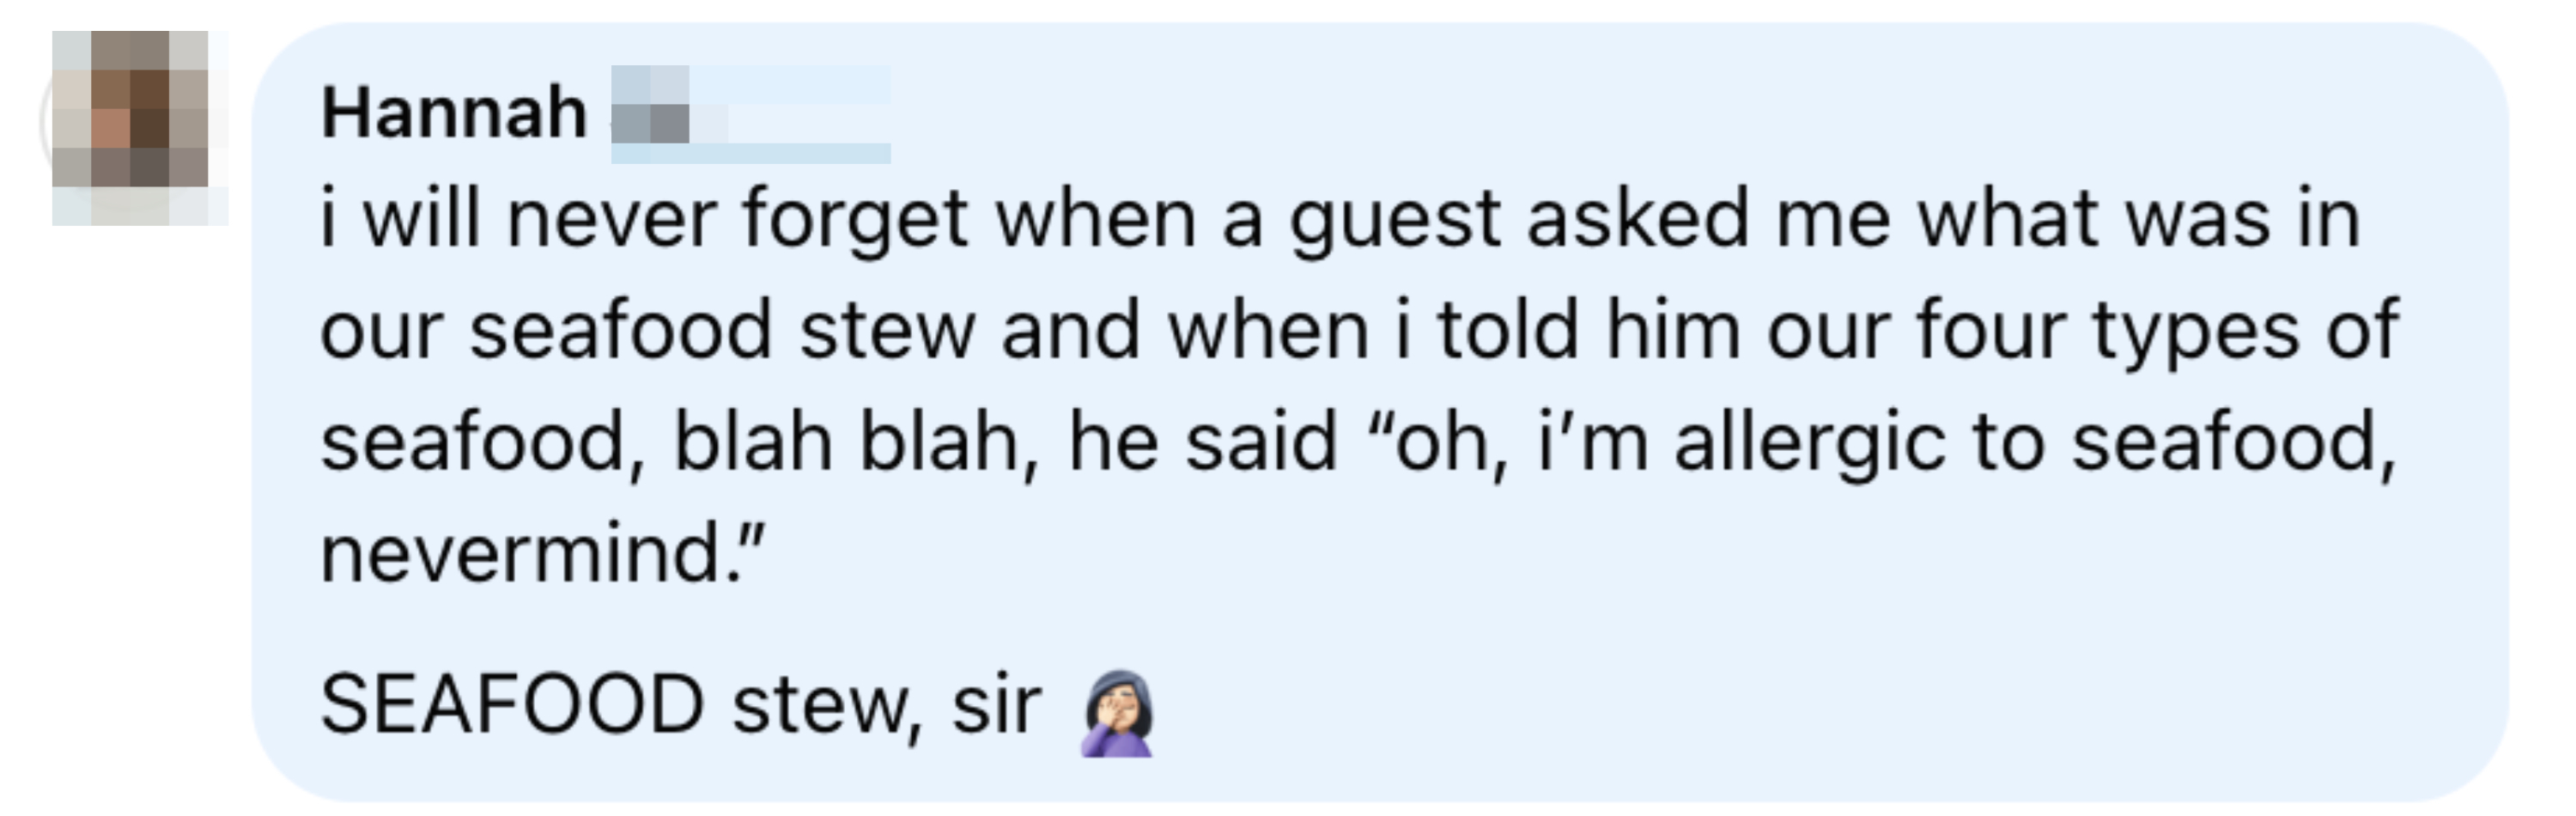 A screenshot of a message recounting a story about a guest&#x27;s reaction to seafood stew ingredients